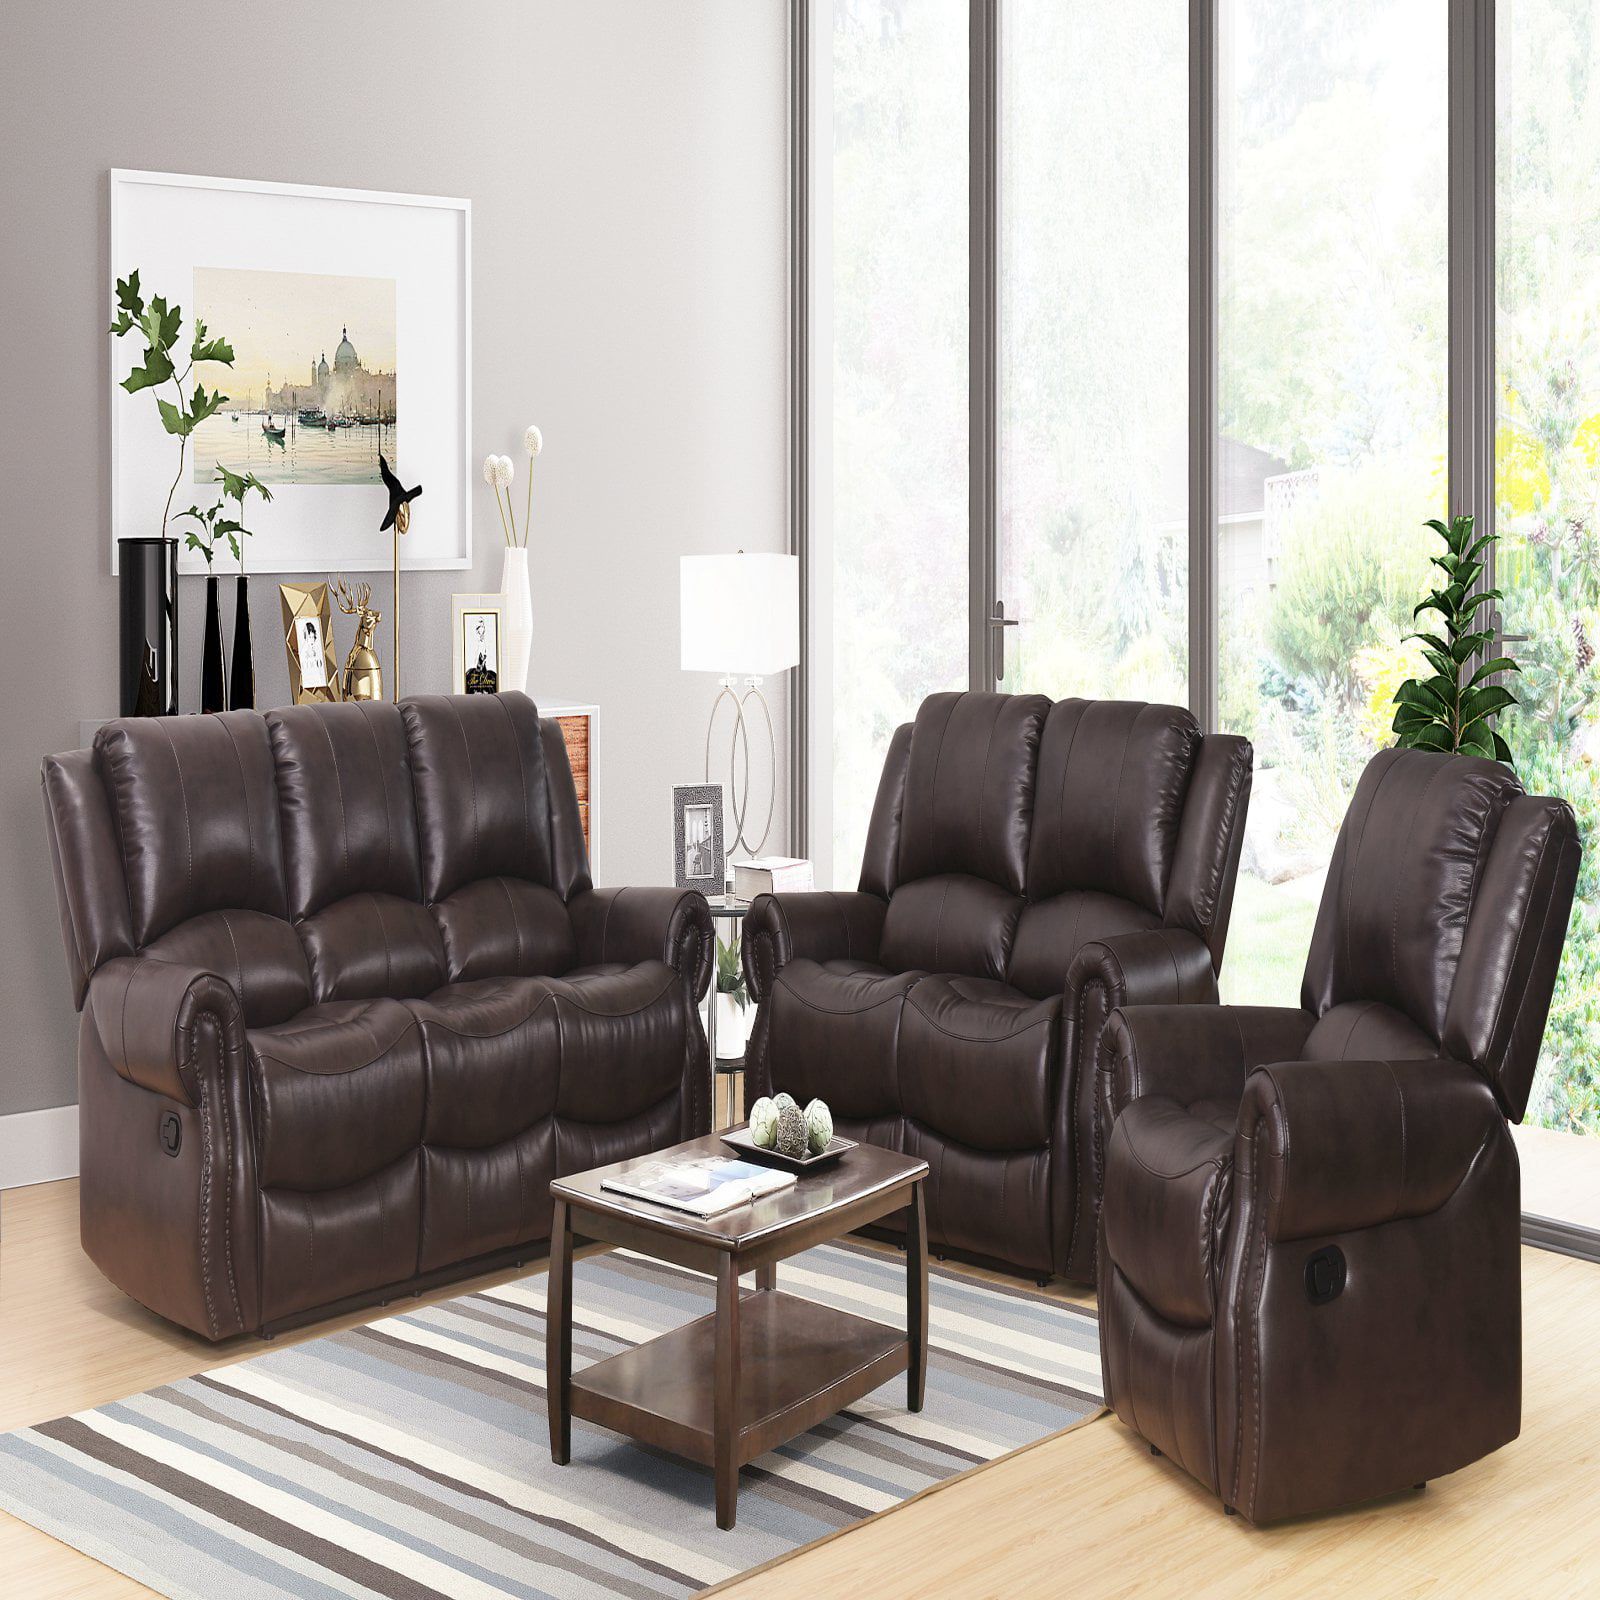 Best And Newest Faux Leather Sofas In Abbyson Living Toya 3 Piece Faux Leather Reclining Sofa Set – Walmart (View 8 of 15)